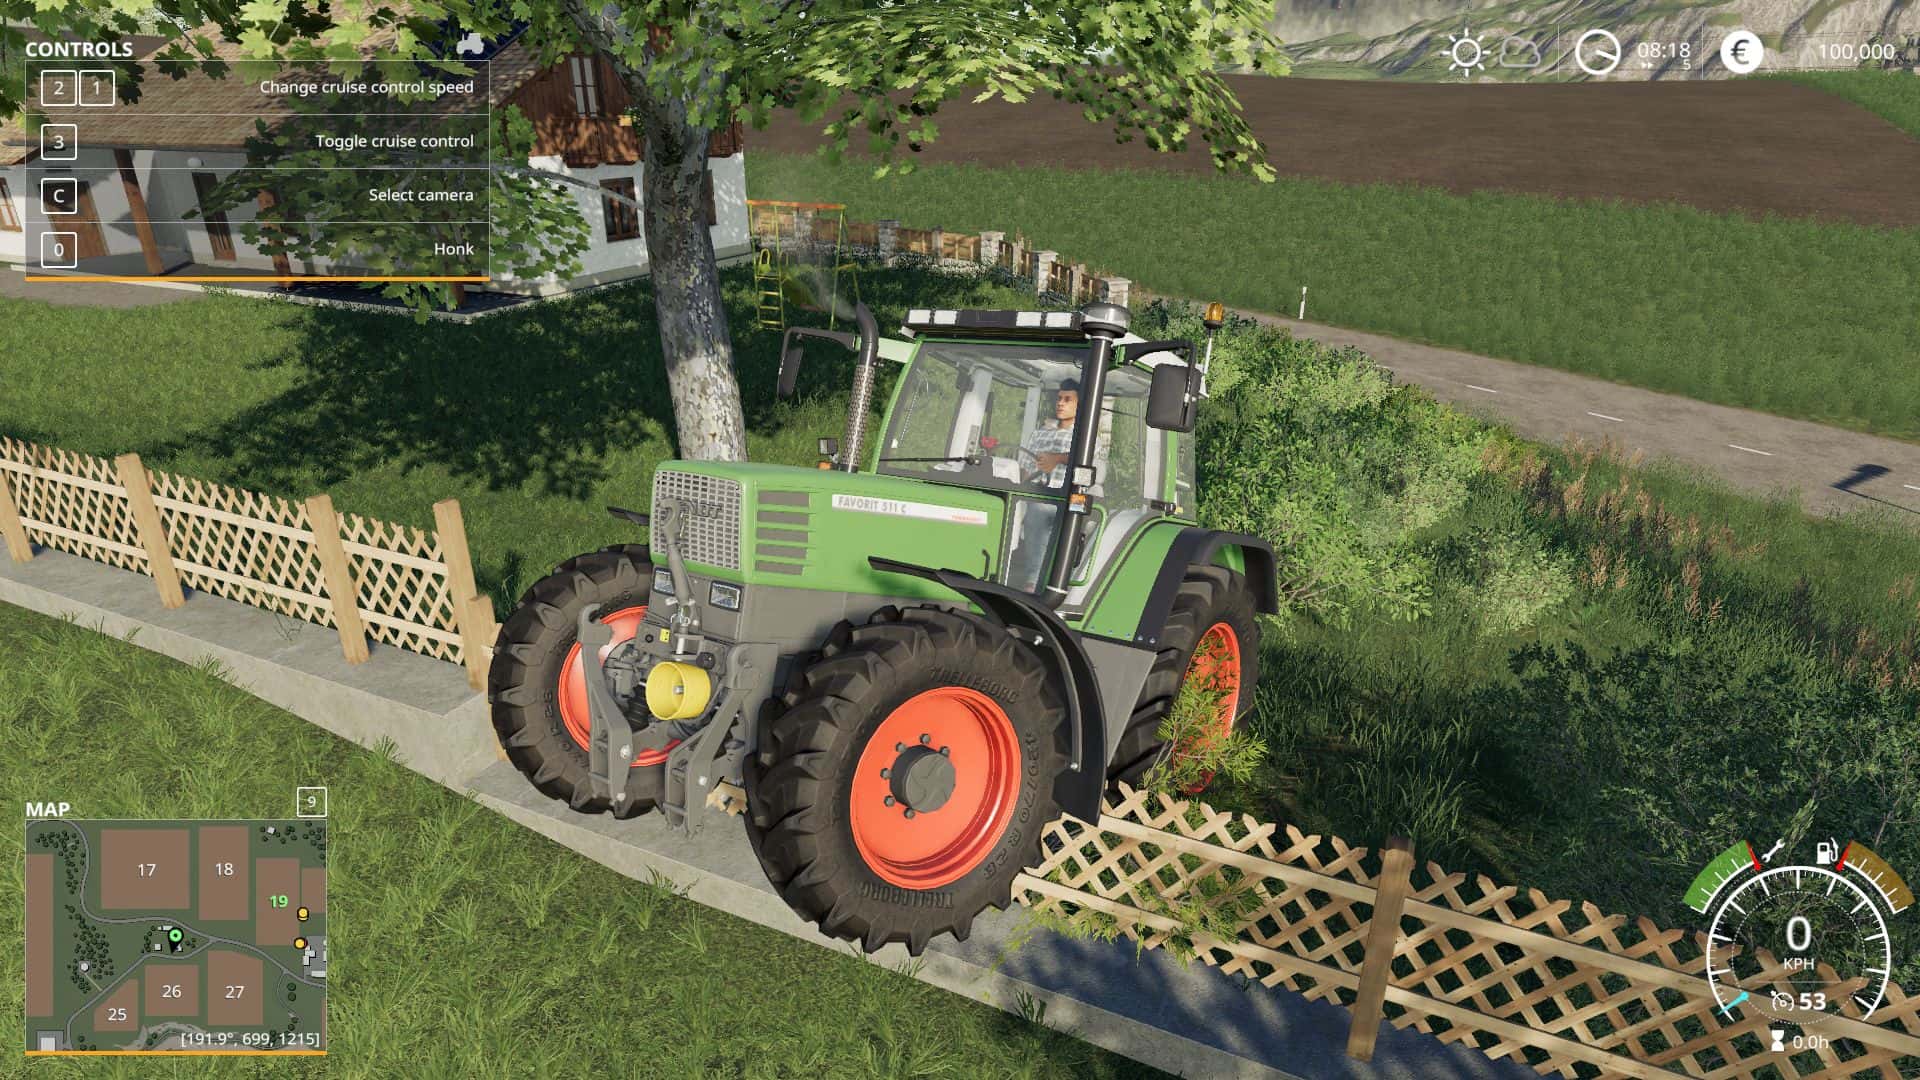 Free PC Games: 'Farming Simulator 19' is your weekly freebie from Epic Games